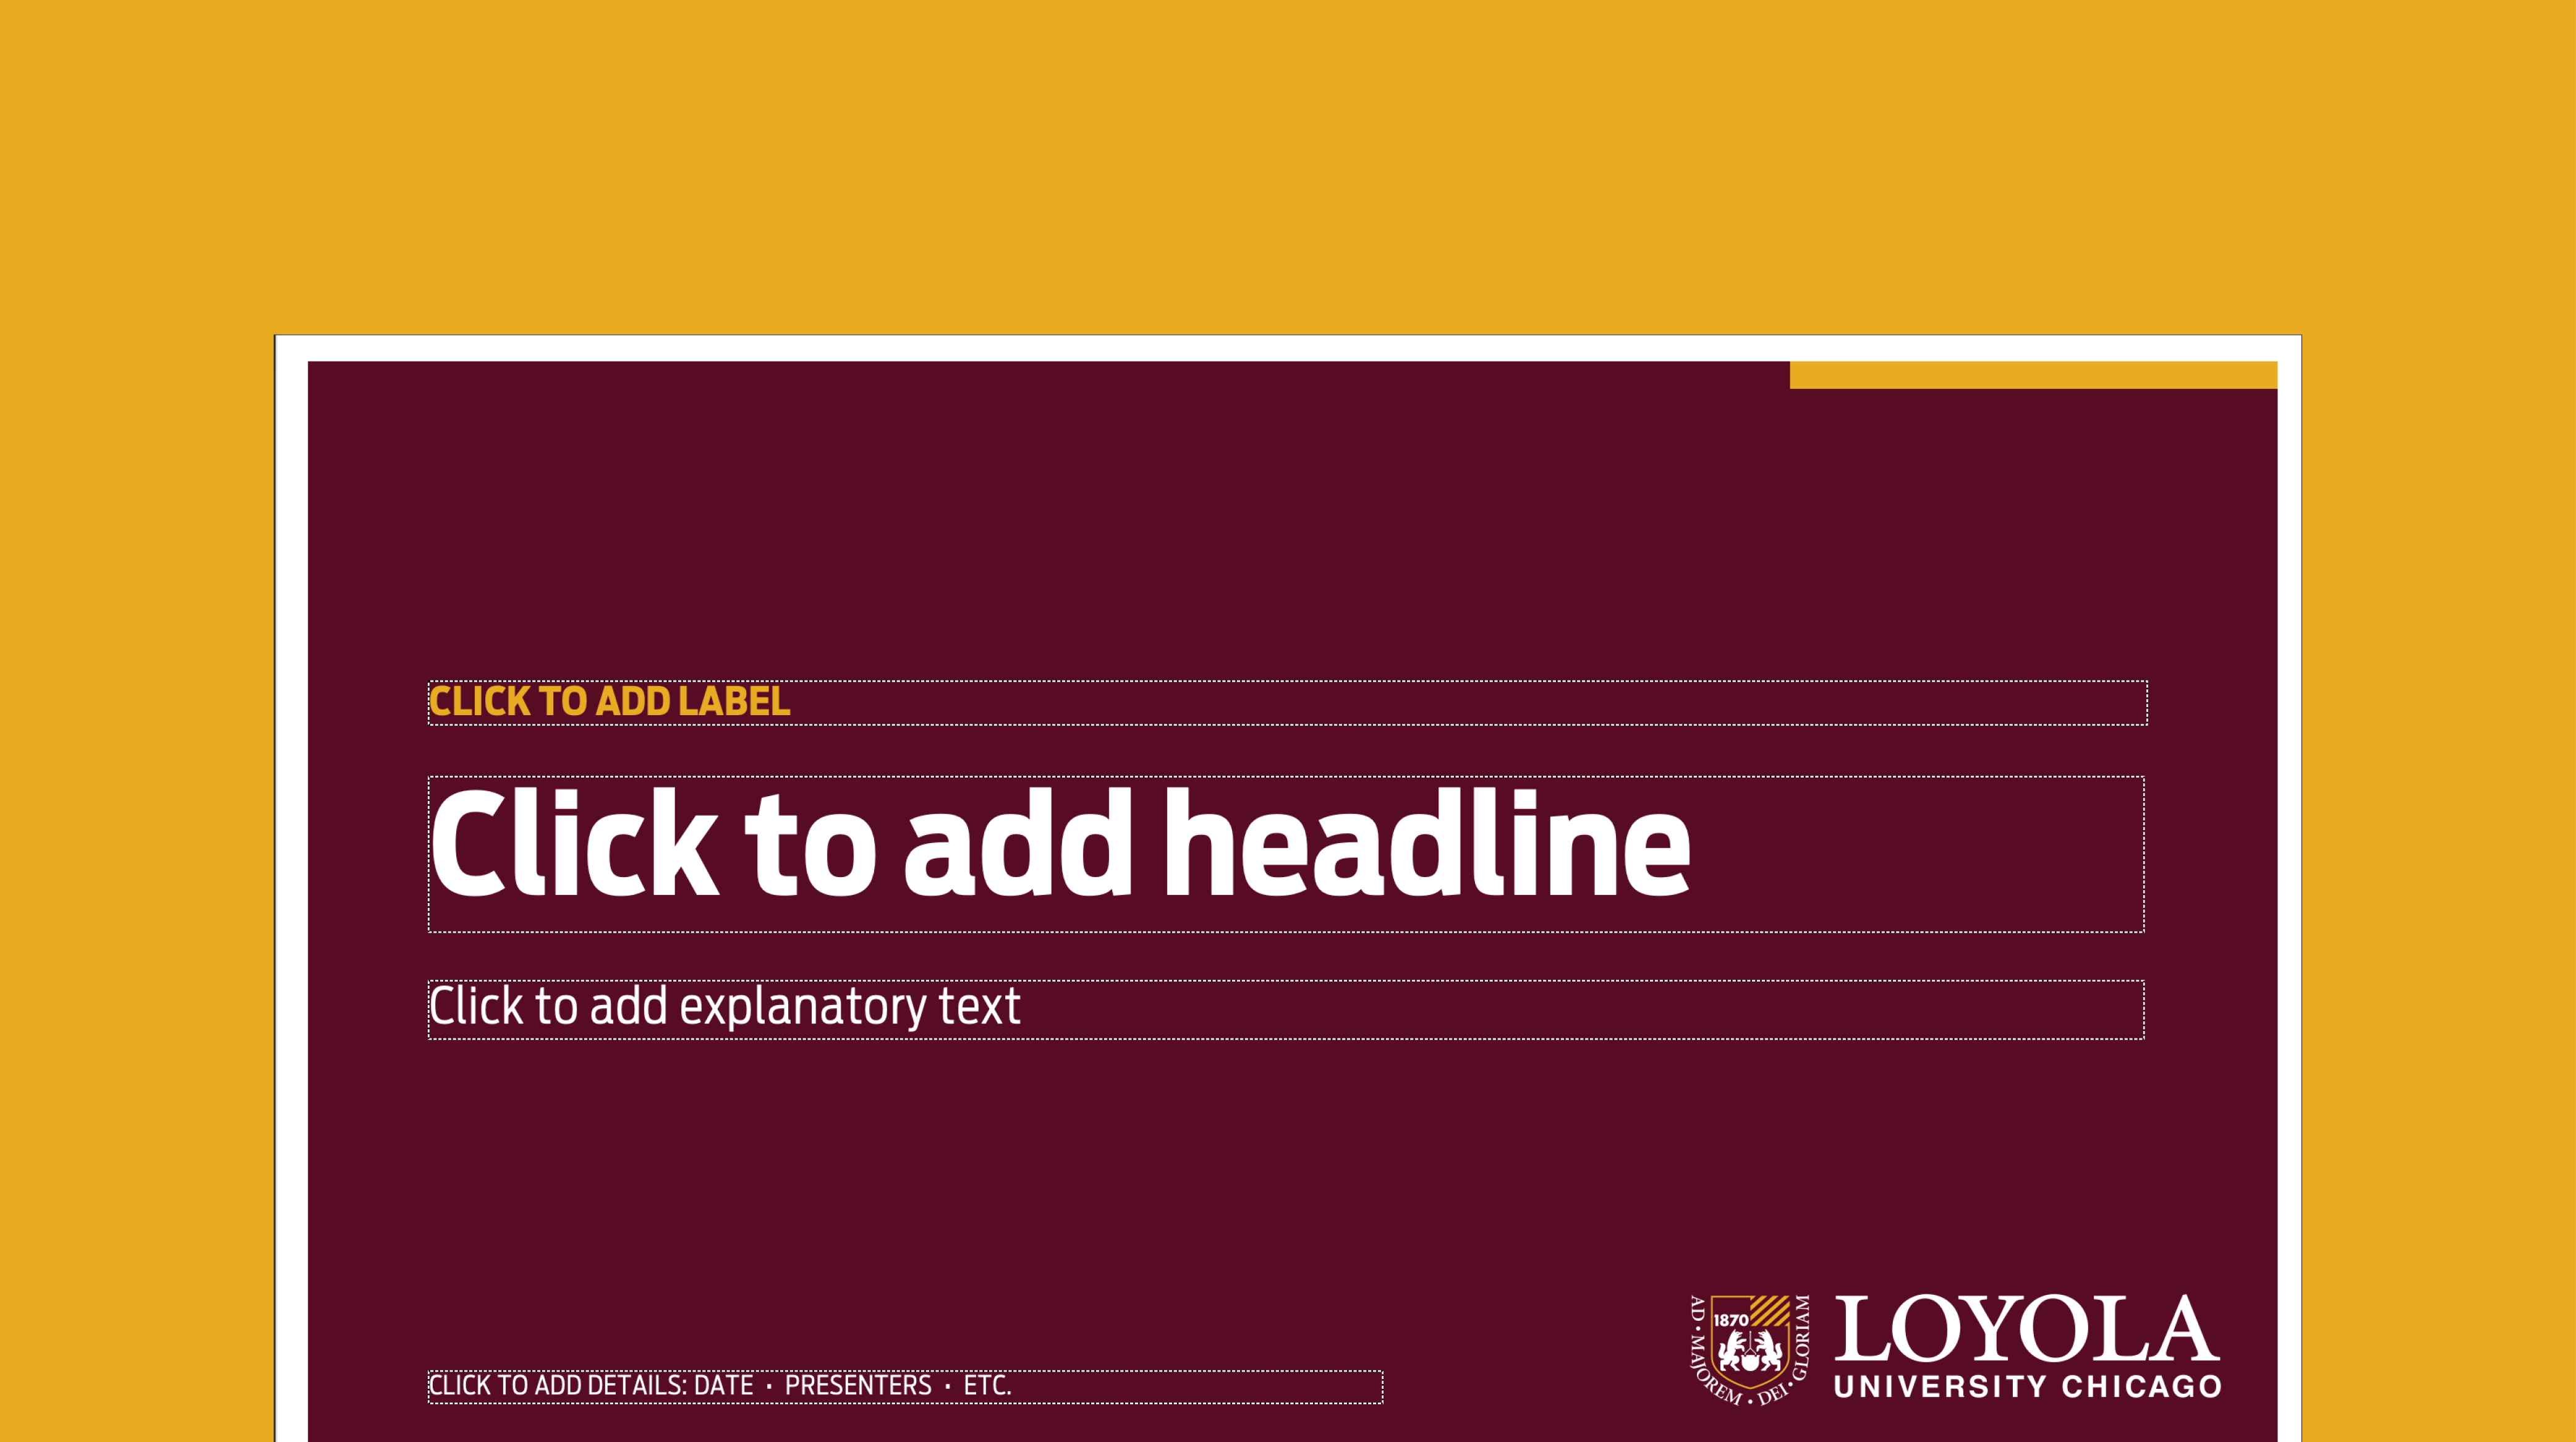 Part of a branded powerpoint slide for Loyola University Chicago. Background is maroon with the logo in the lower right corner; text is white and gold